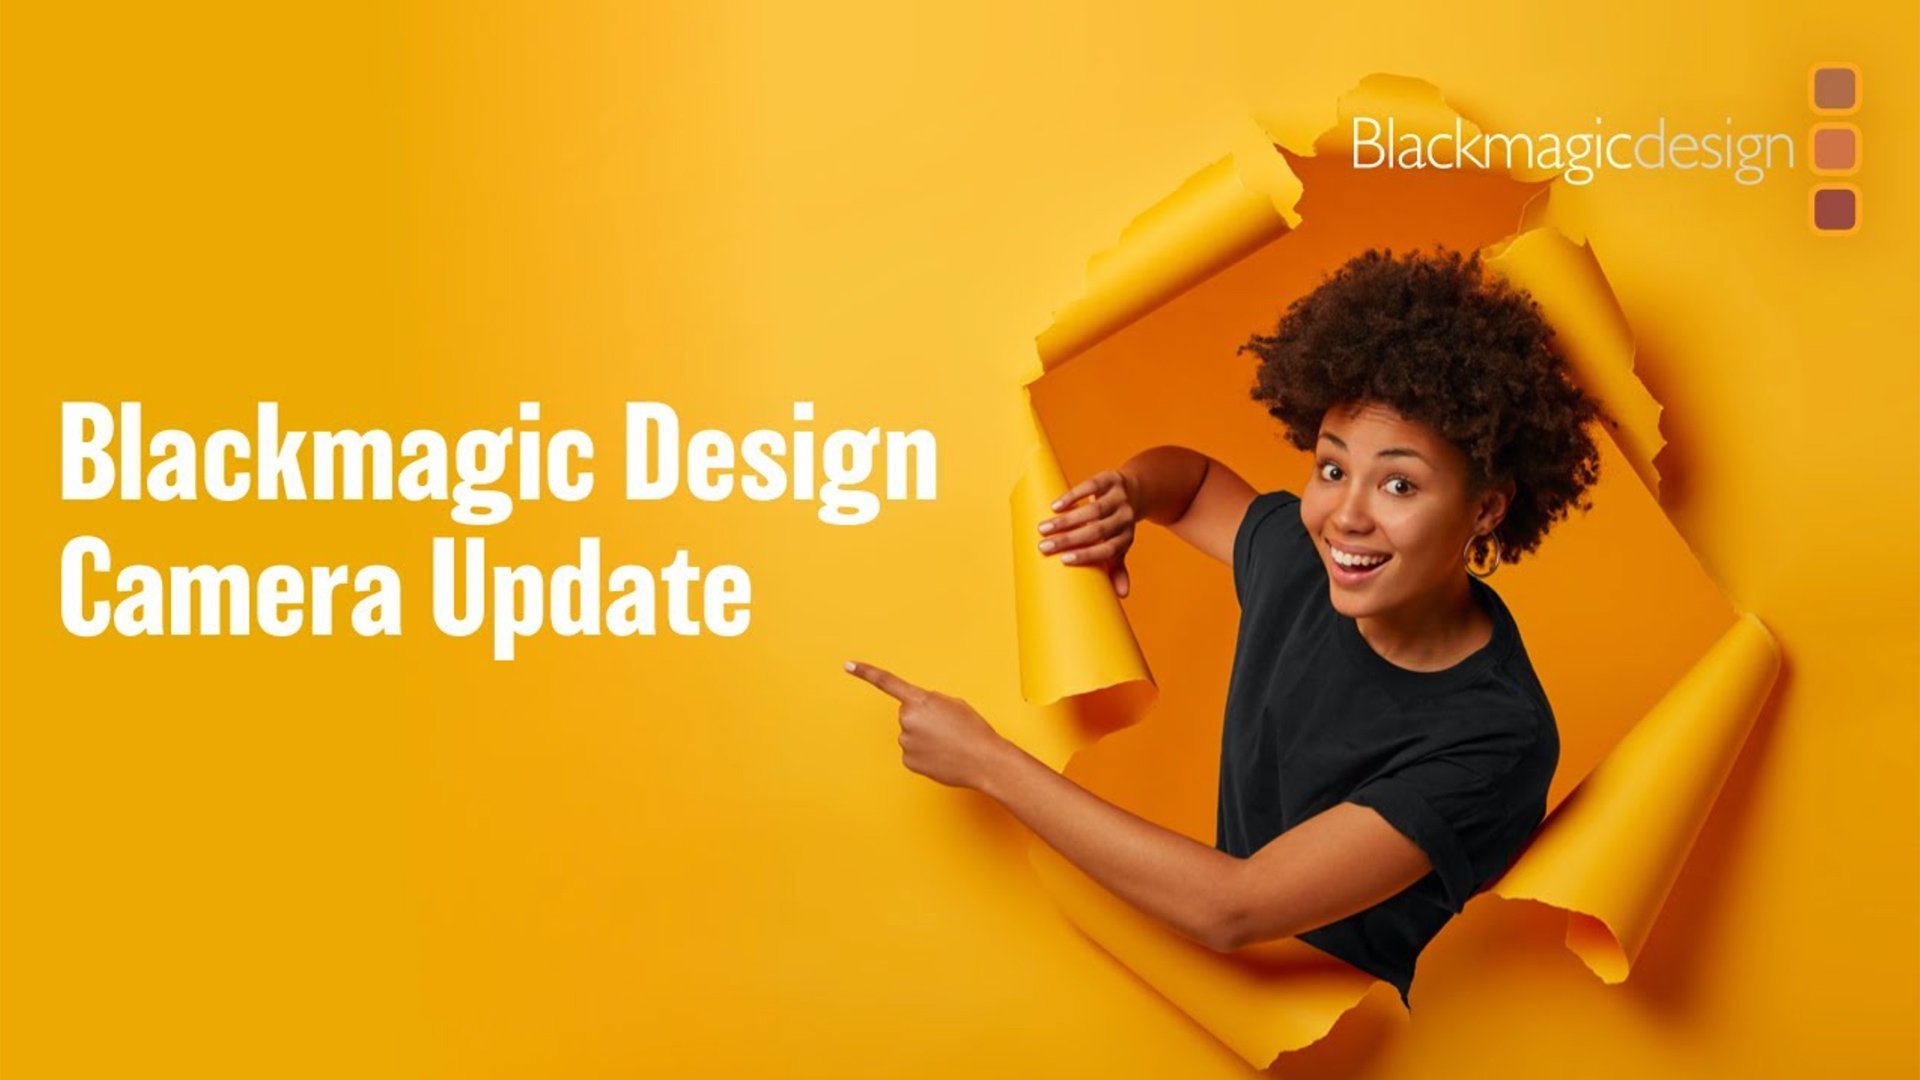 Stand by for an announcement from Blackmagic Design